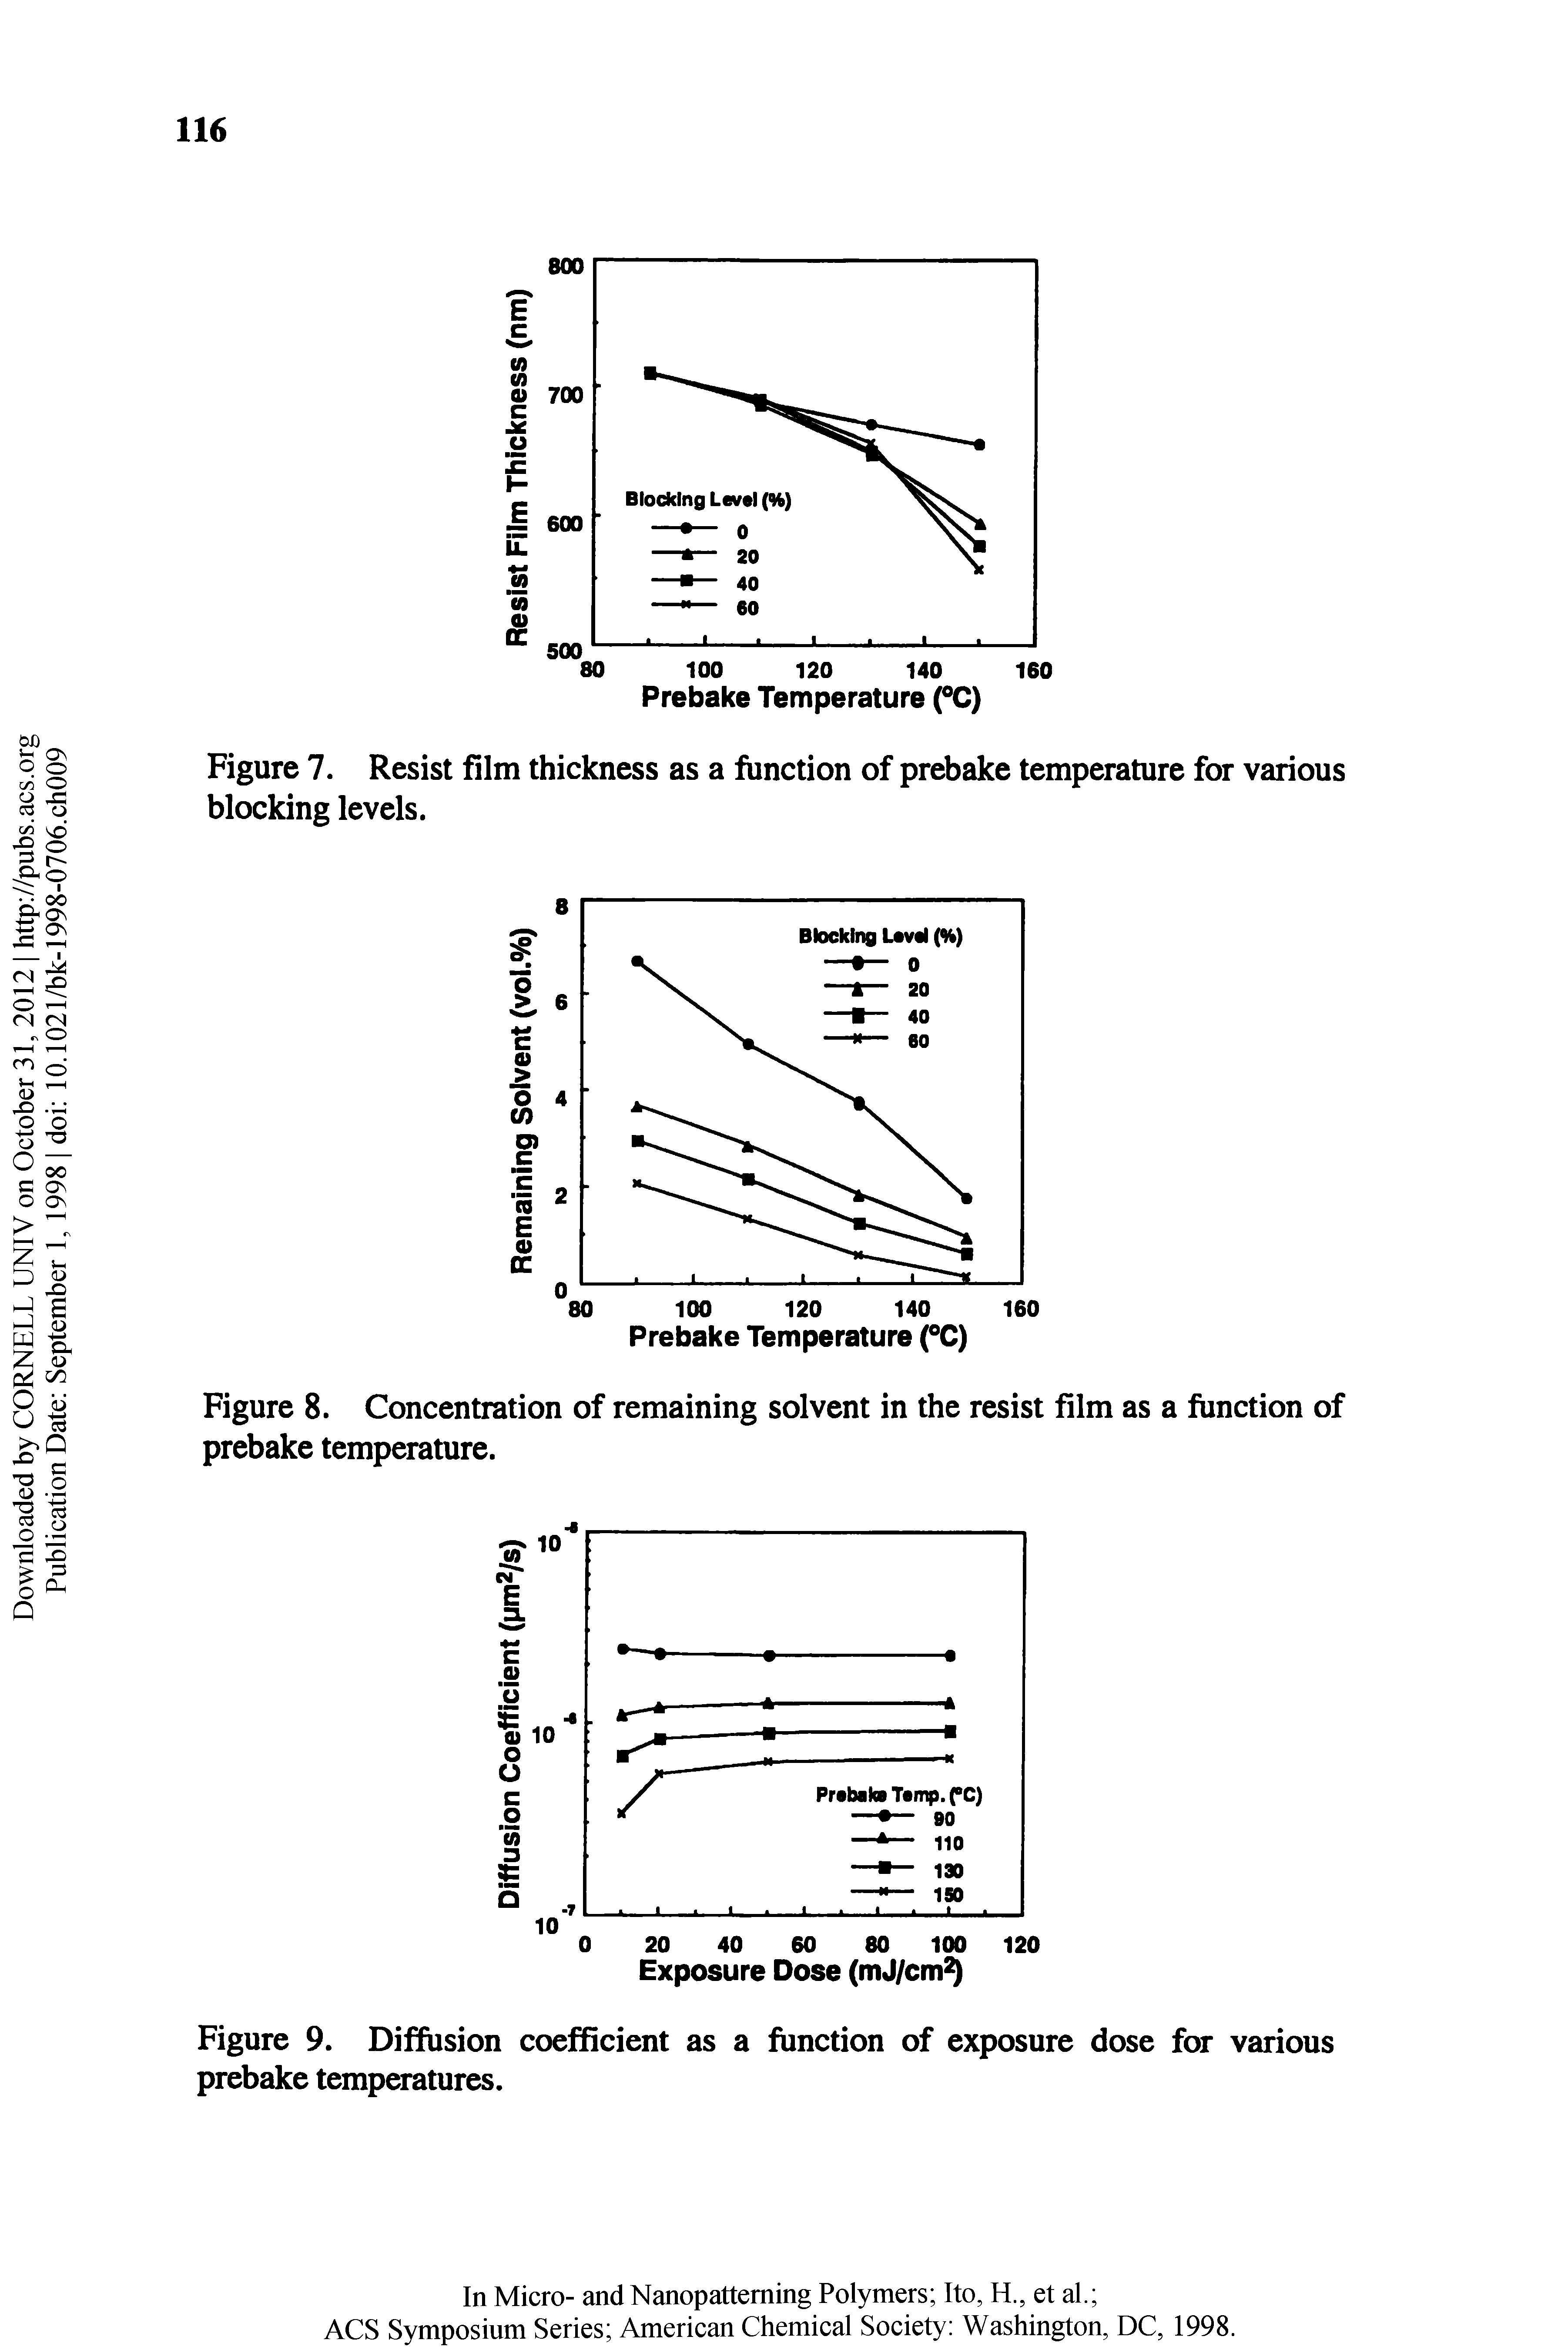 Figure 9. Diffusion coefficient as a function of exposure dose for various prebake temperatures.